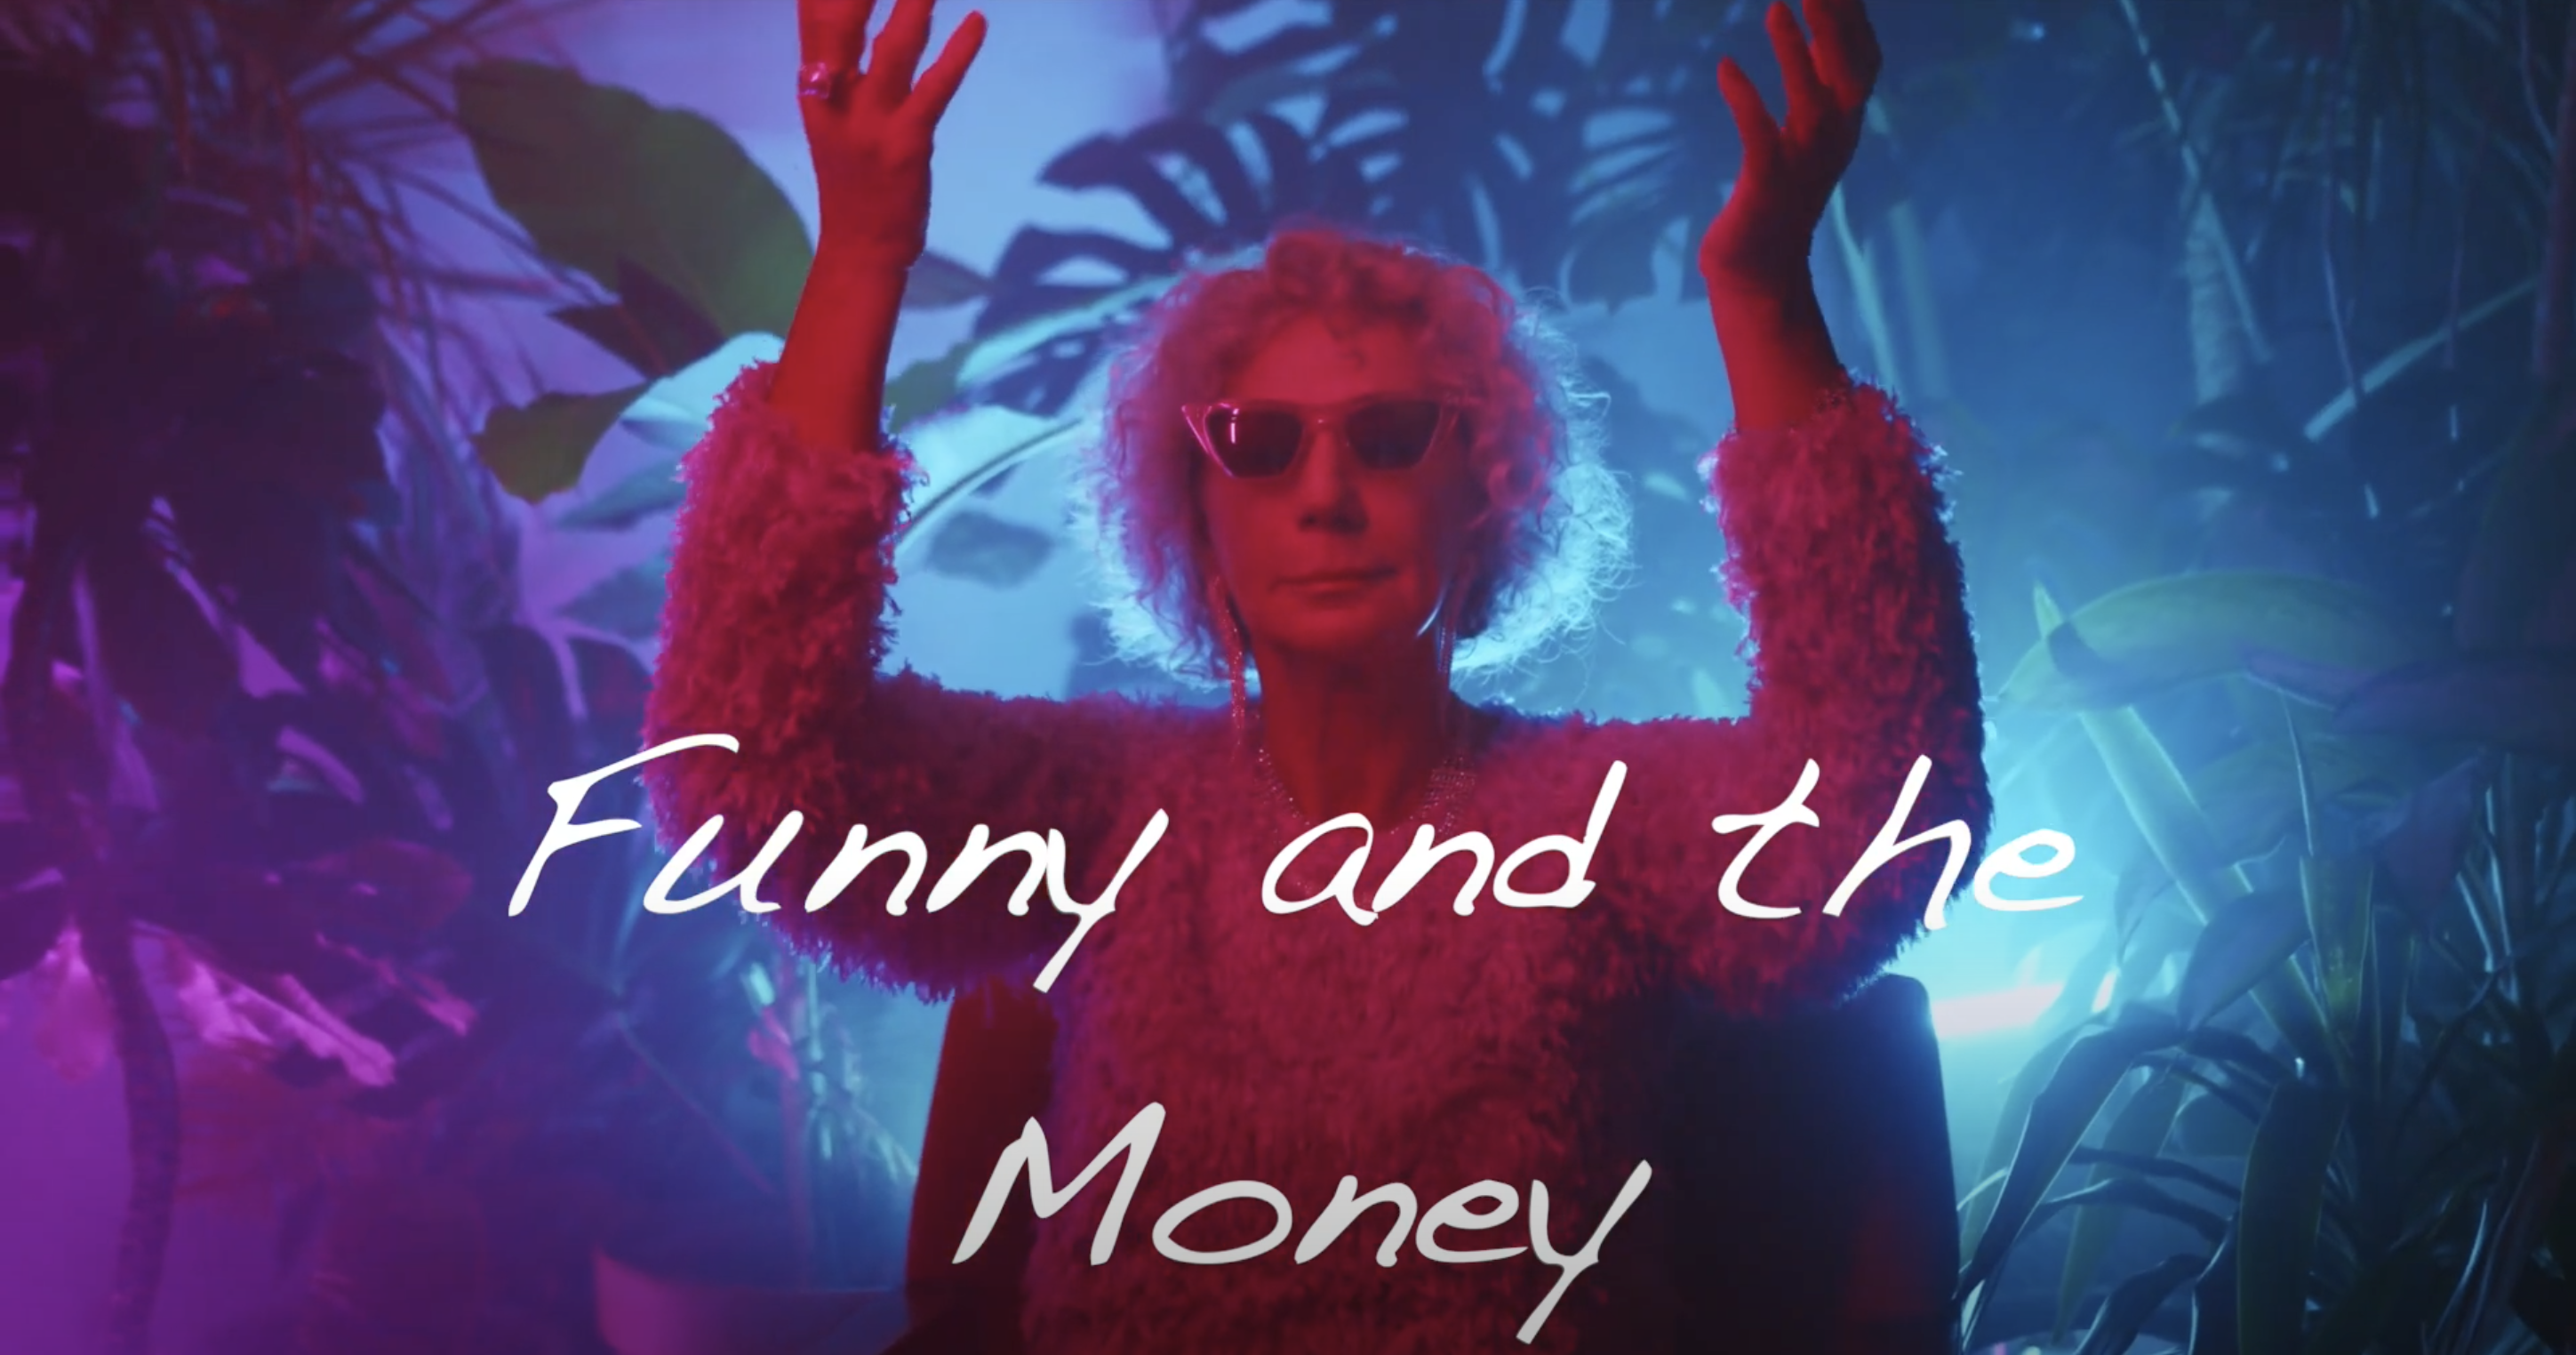 Our Podcast Series - Funny and the Money